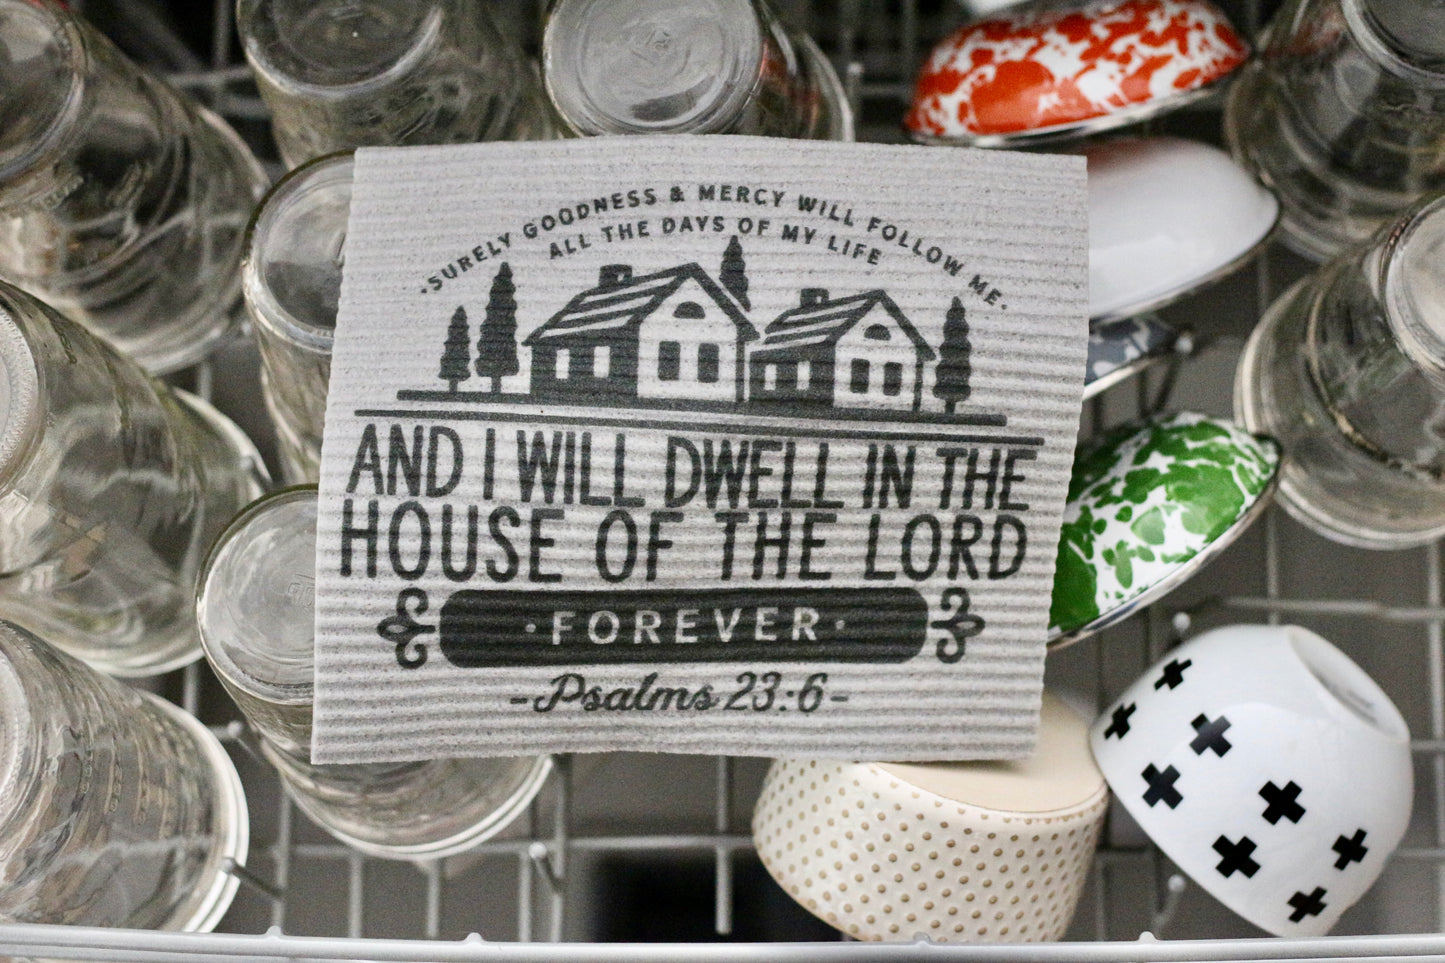 surely goodness & mercy will follow me - I will dwell in the house of the Lord forever (Psalms 23:6) - Swedish dishcloth